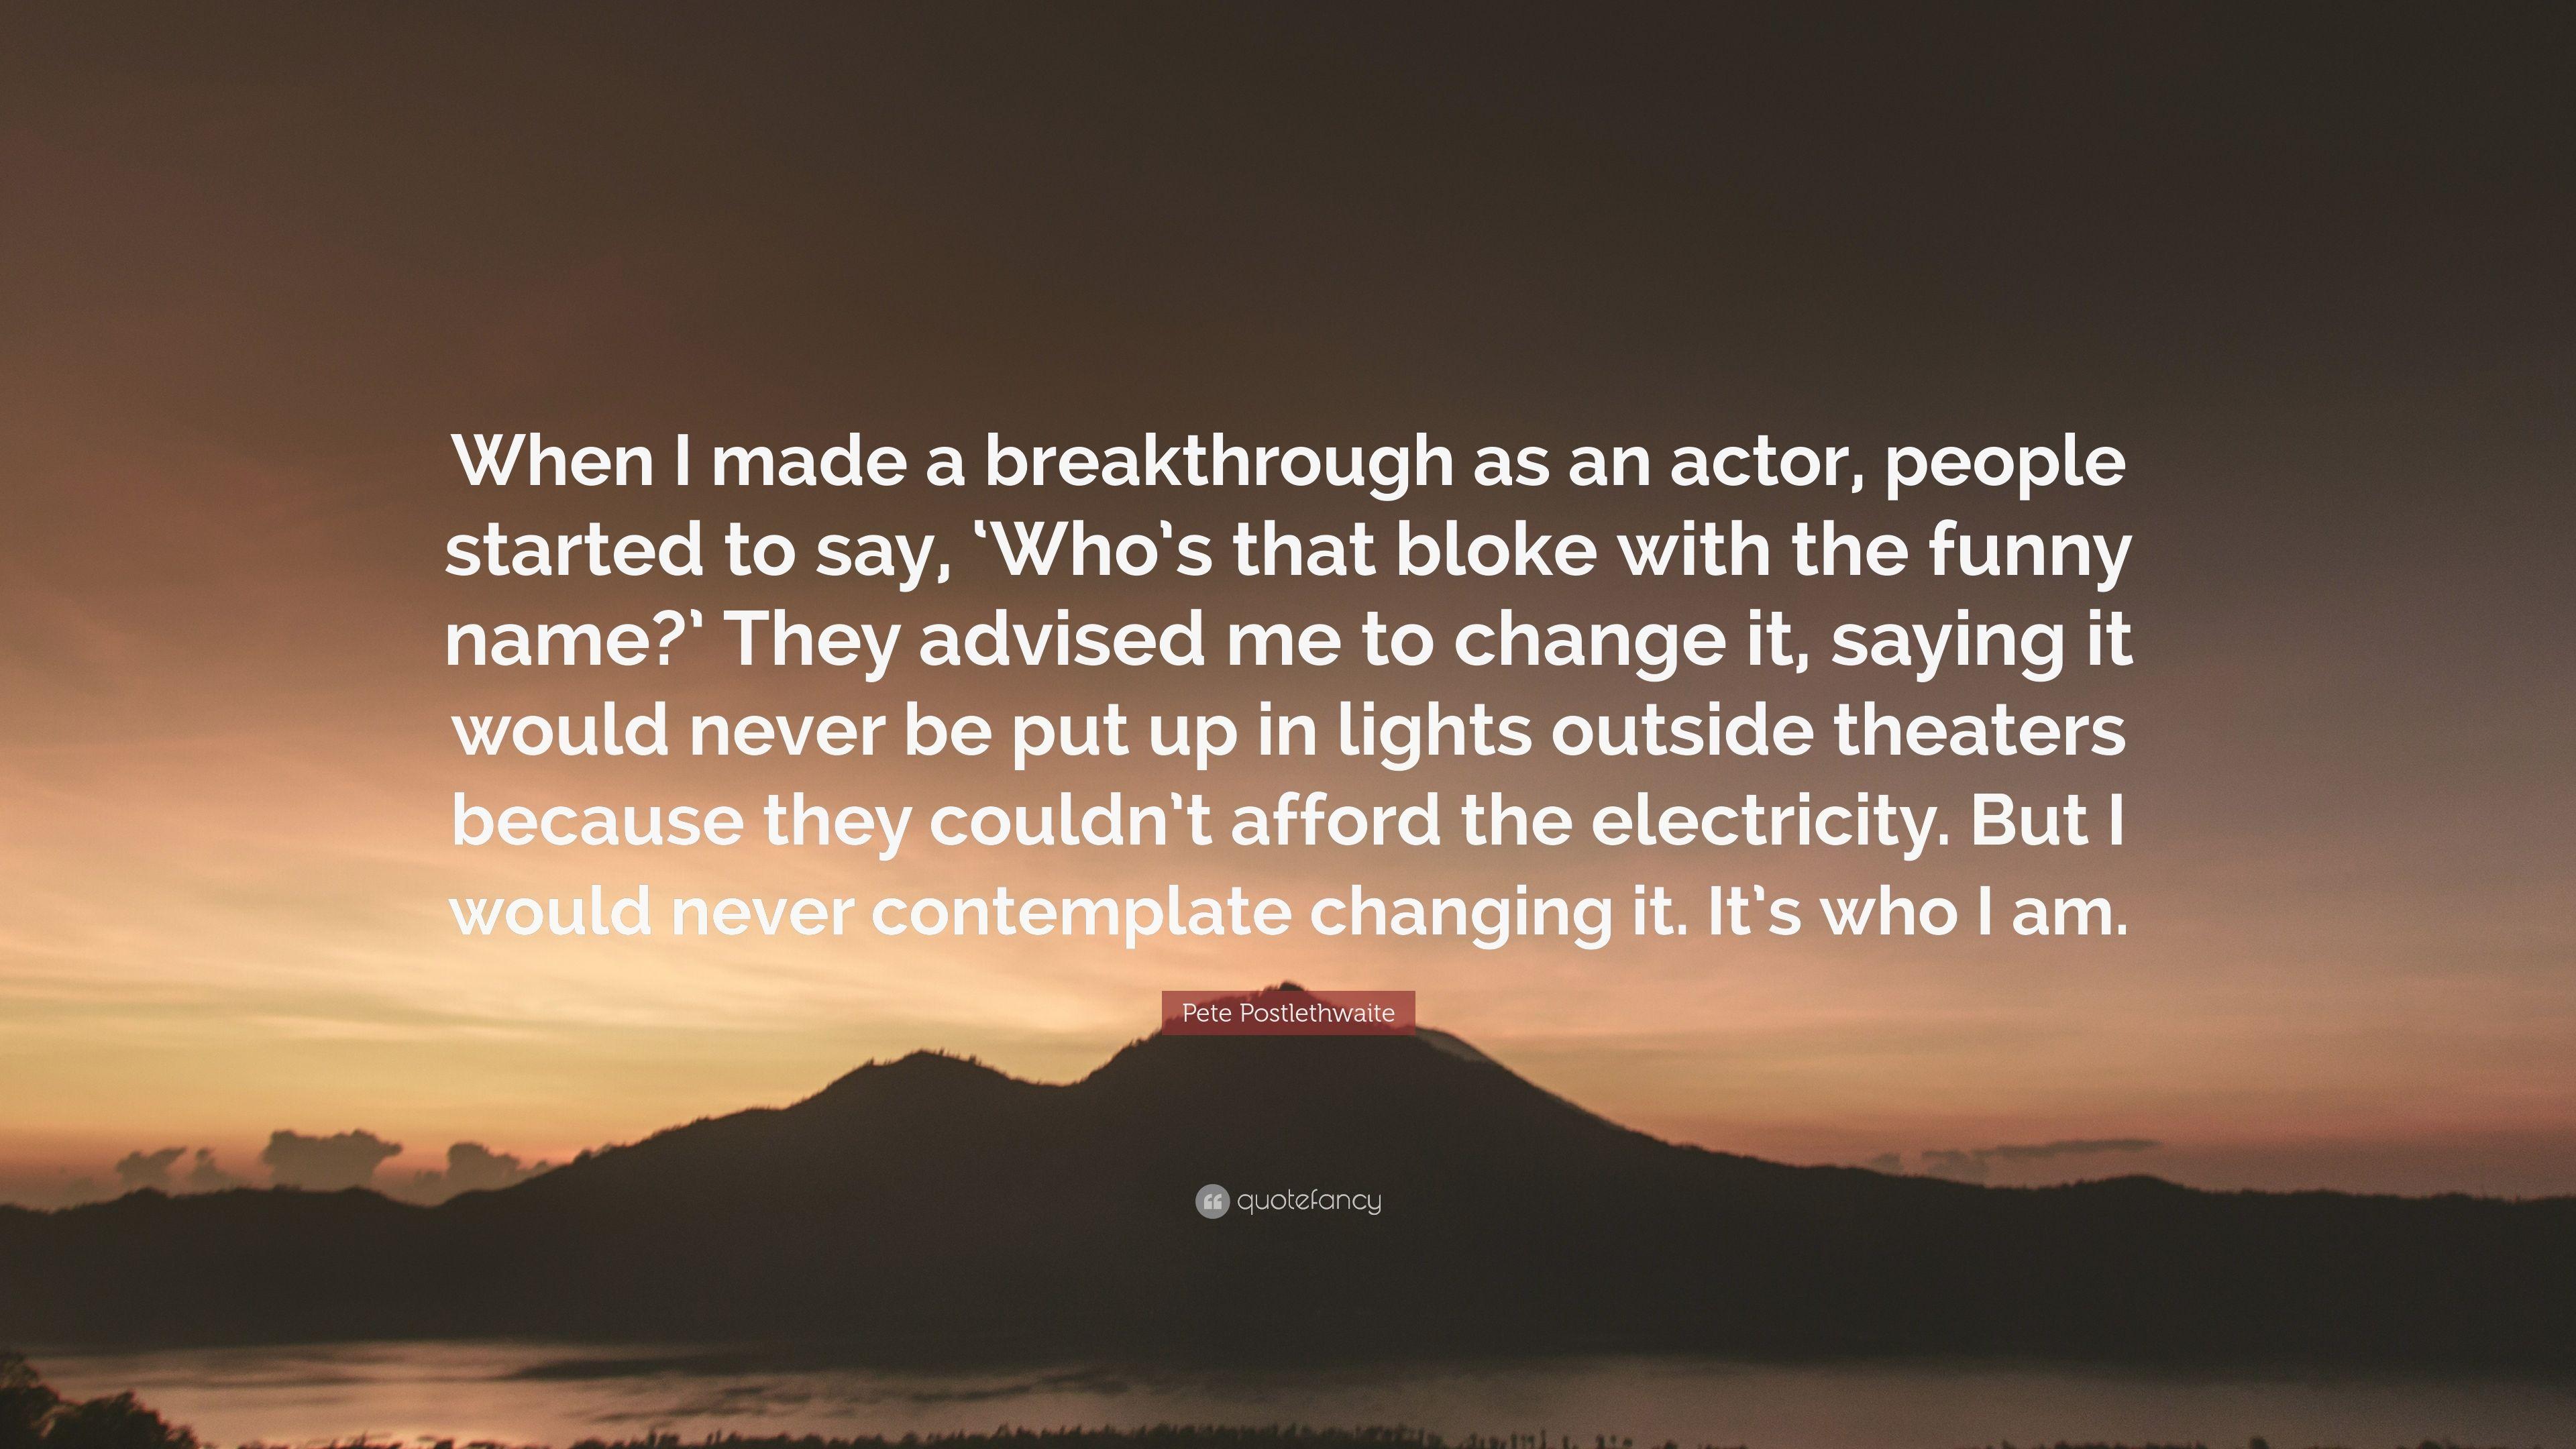 Pete Postlethwaite Quote: “When I made a breakthrough as an actor